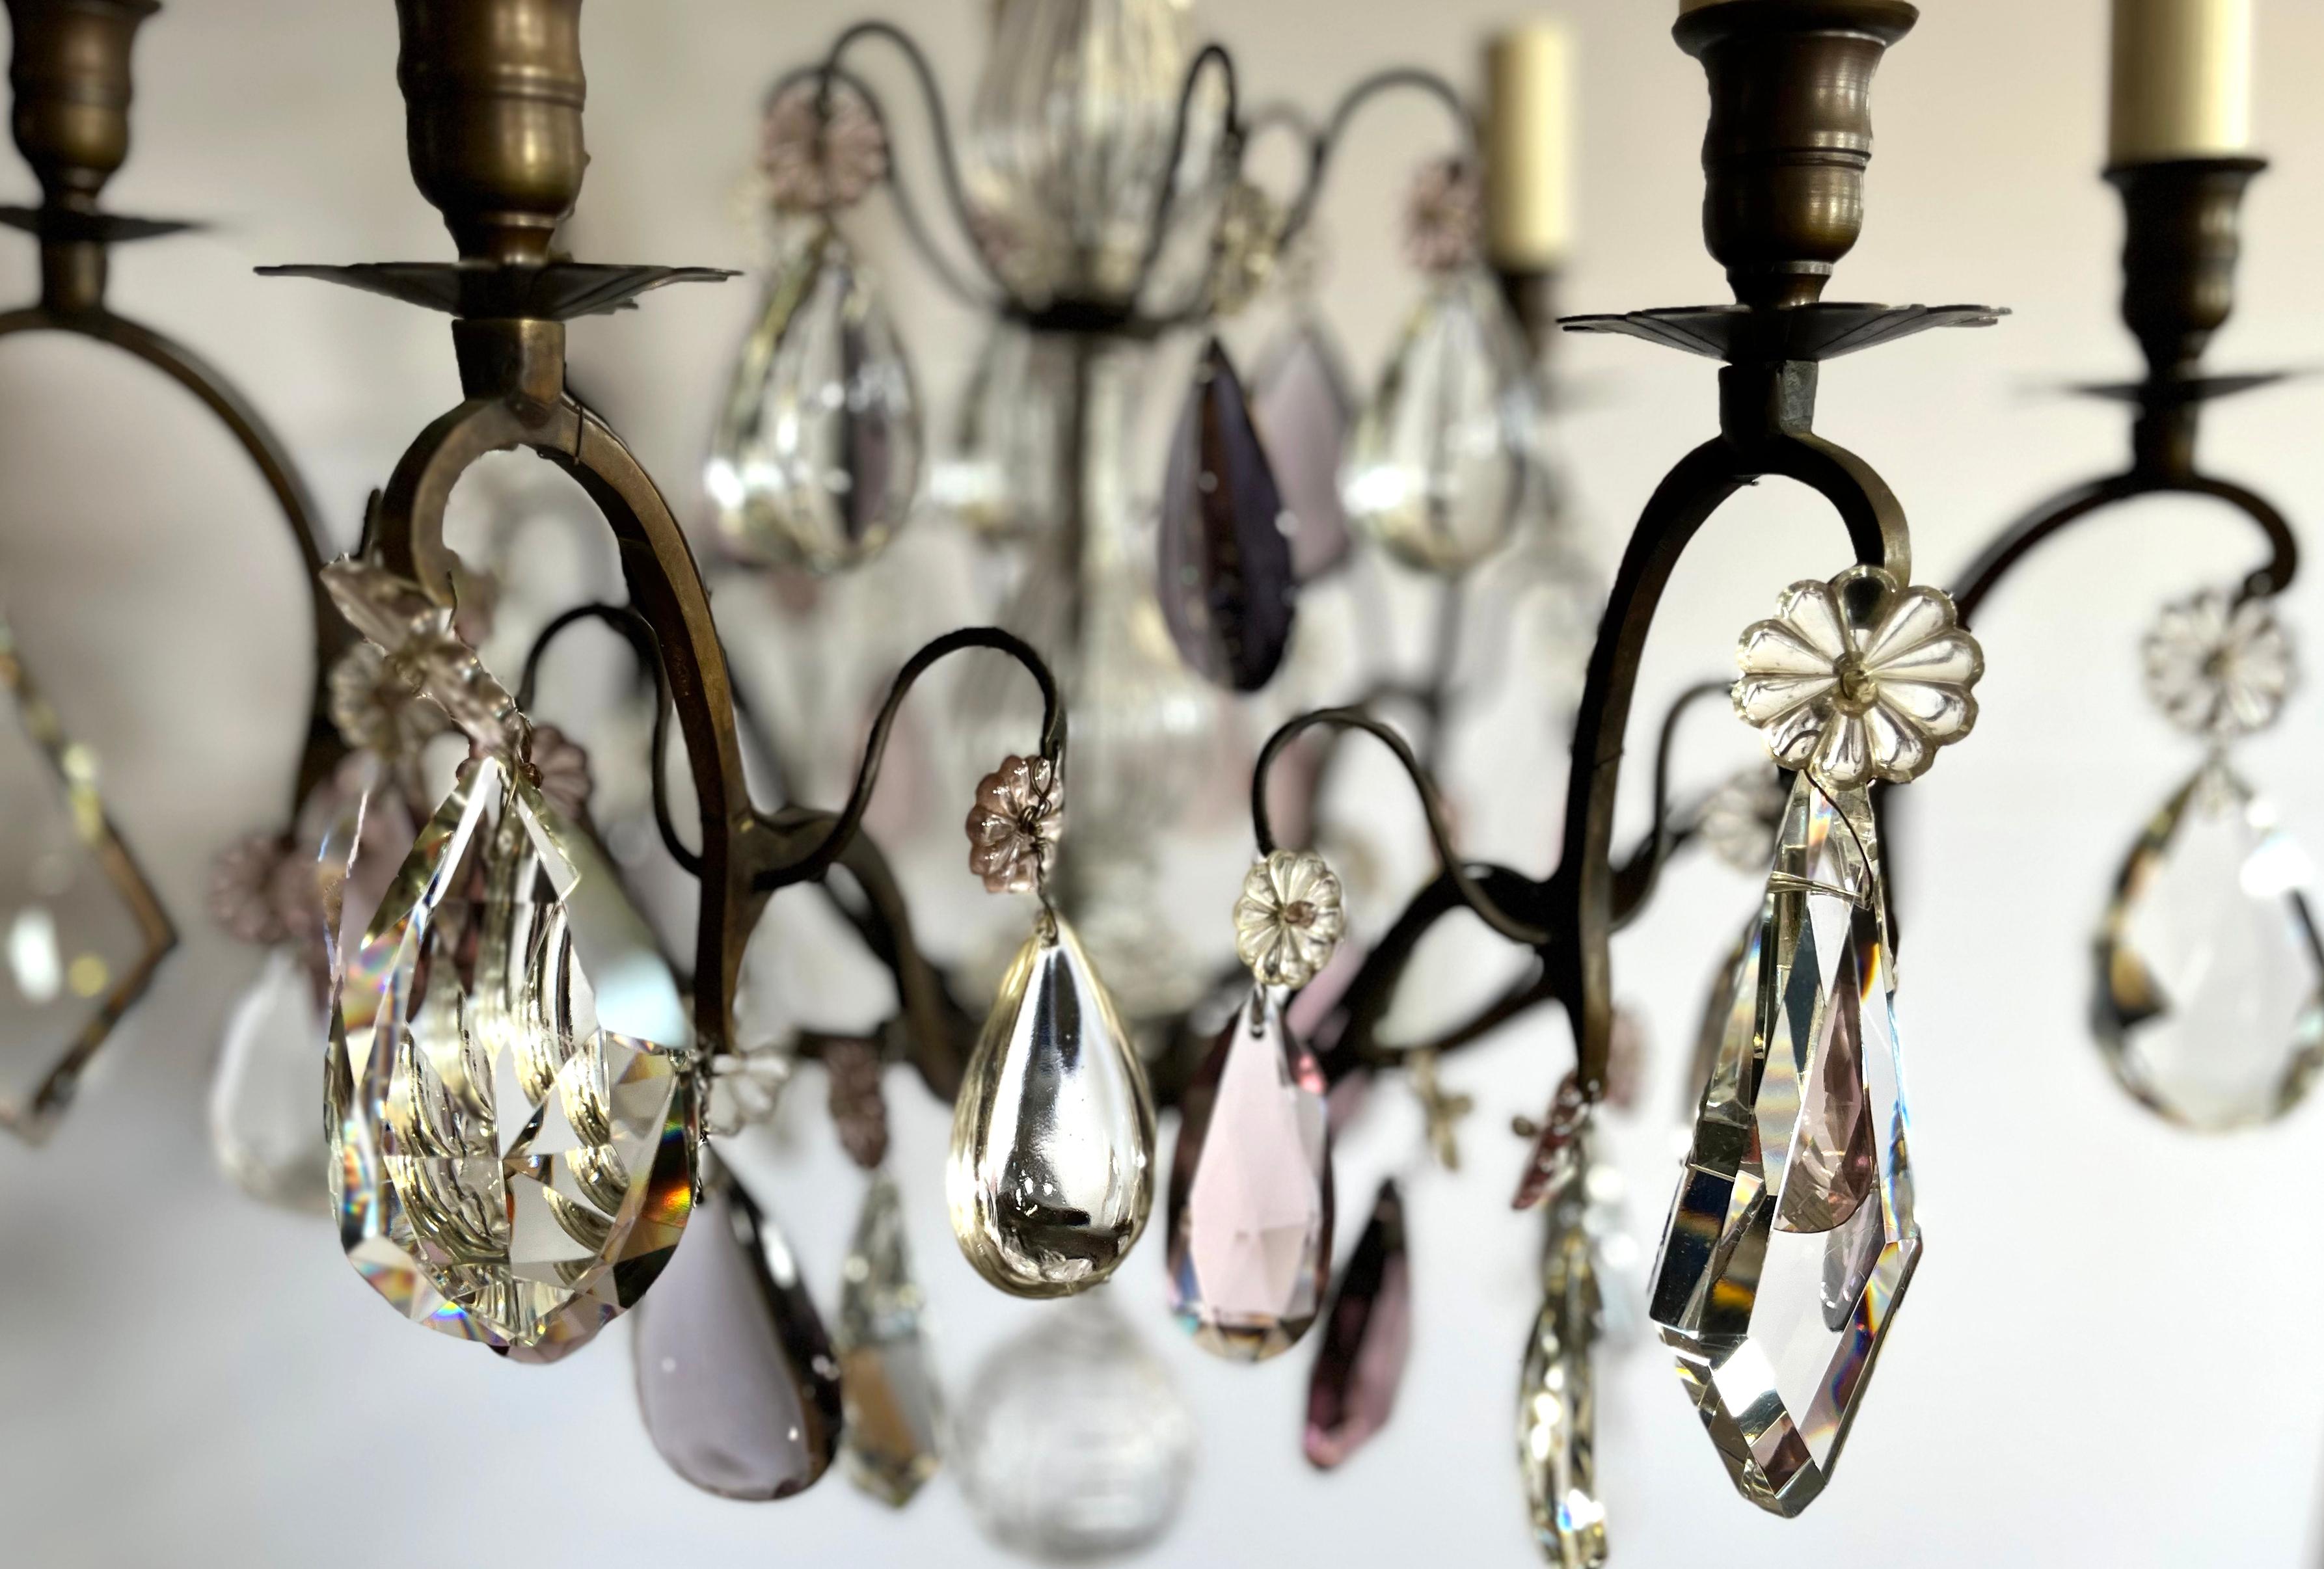 Mid-20th century French Seven-light crystal chandelier with a patinated dark bronze frame. Scrolled foliate arms adorned with unusual Amethyst faceted pear drops. Decorated with ribbed glass centre stem, bronze spires and wonderful crystal